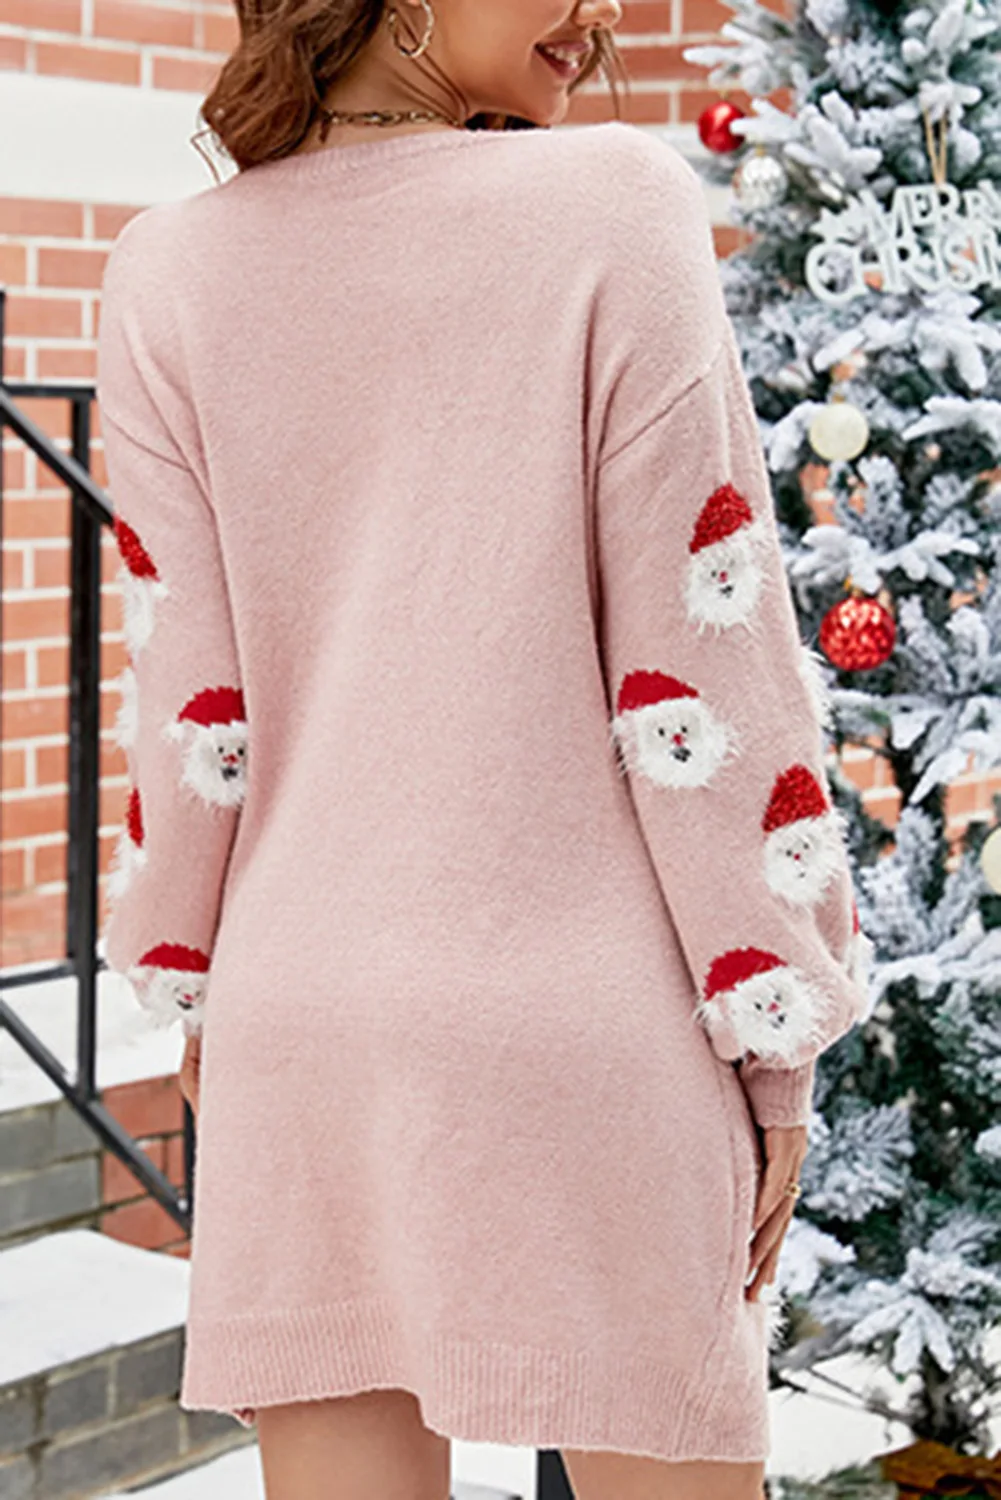 Dear-Lover Light Pink Fuzzy Christmas Santa Clause Sweater Christmas Dress For Women